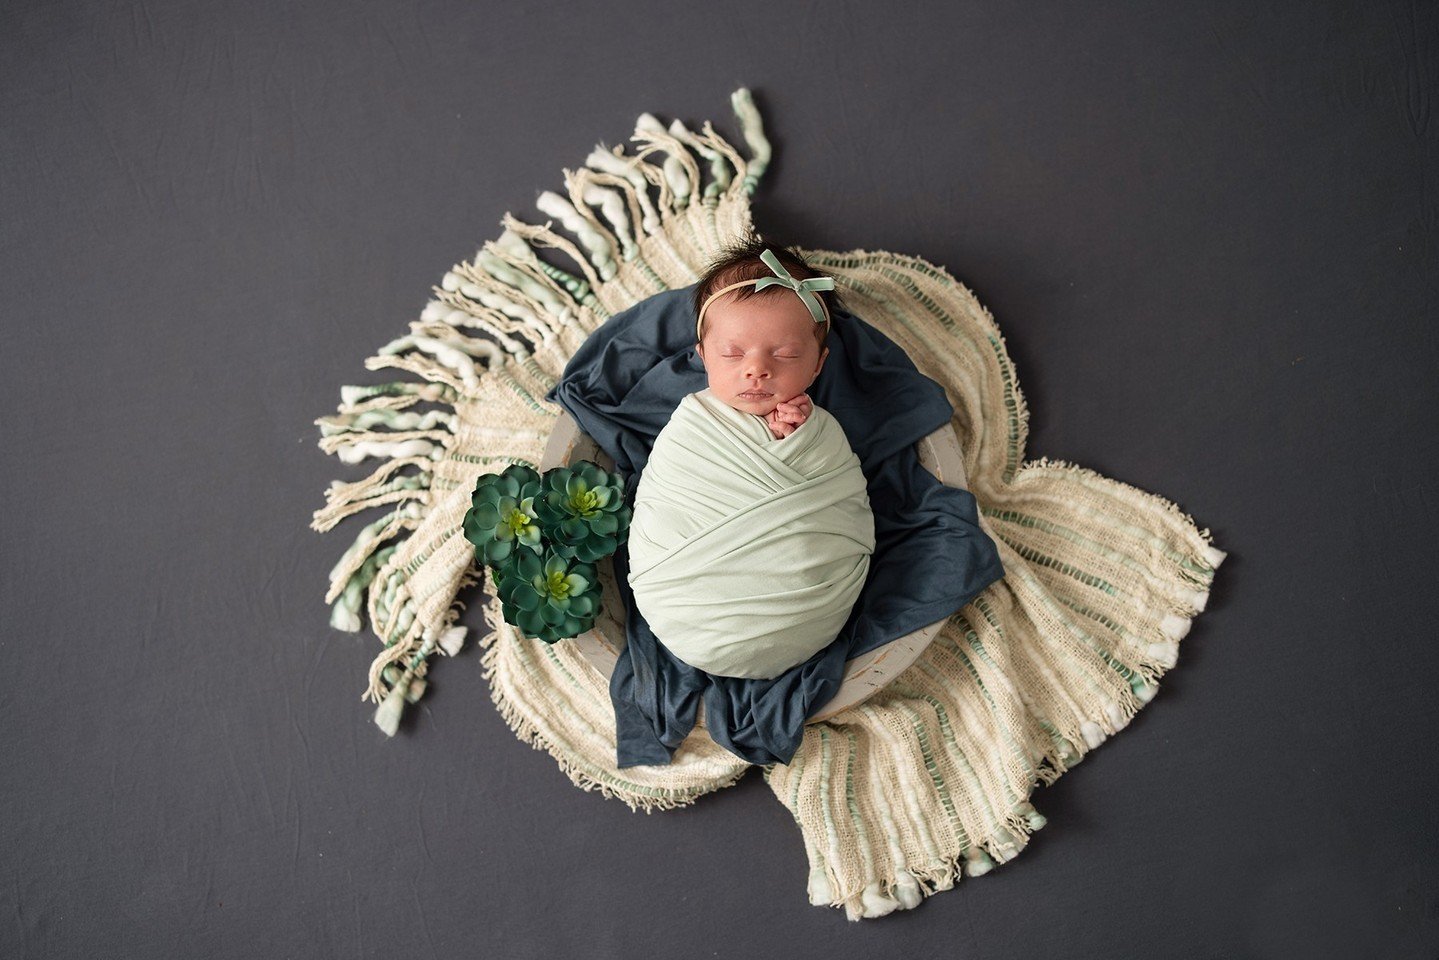 We are in LOVE with this look. The dark background with these tropical vibes! What do you think? 
.
.
.⁠
#FamilyPortraitSession #NewbornPhotographers #NewbornPhotographyProps #NewbornPhotoshoot #NewbornInspiration #PhotographyBackdrops #TheEverymom #